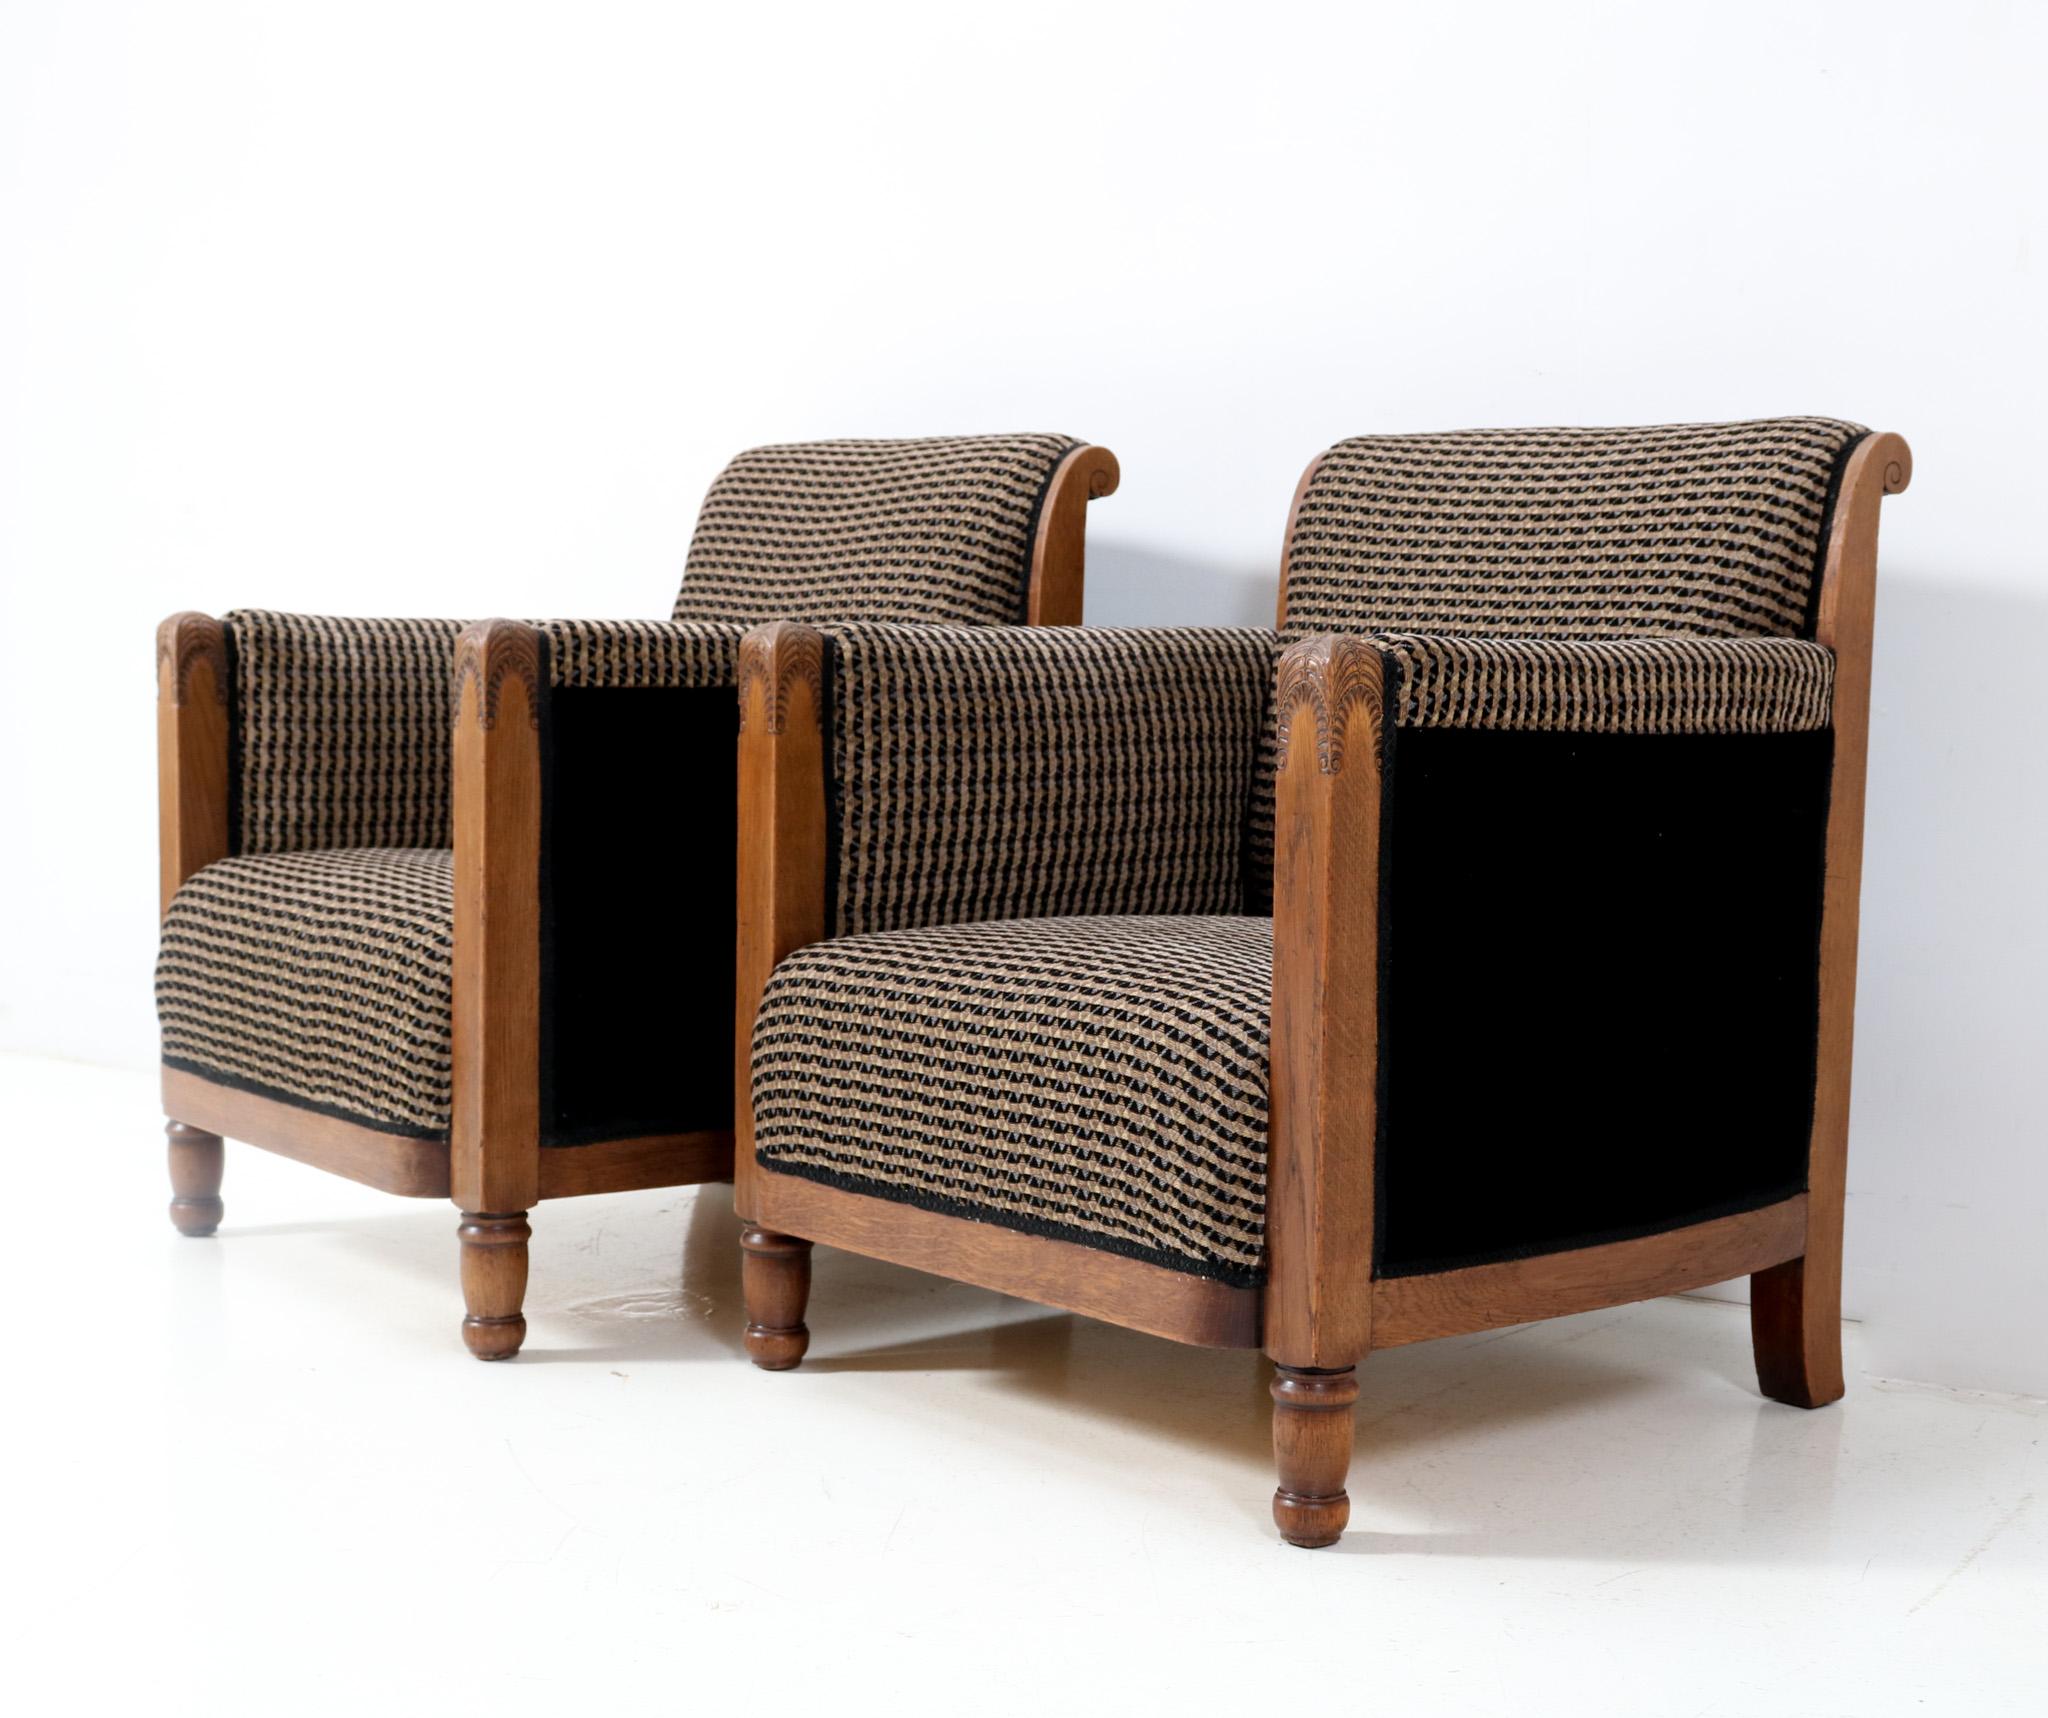 Magnificent and rare pair of Art Deco Amsterdamse School lounge chairs.
The design attributed to Chris Bartels Haarlem.
Striking Dutch design from the 1920s.
Solid oak frames with typical Amsterdamse School style elements.
Re-upholstered with a